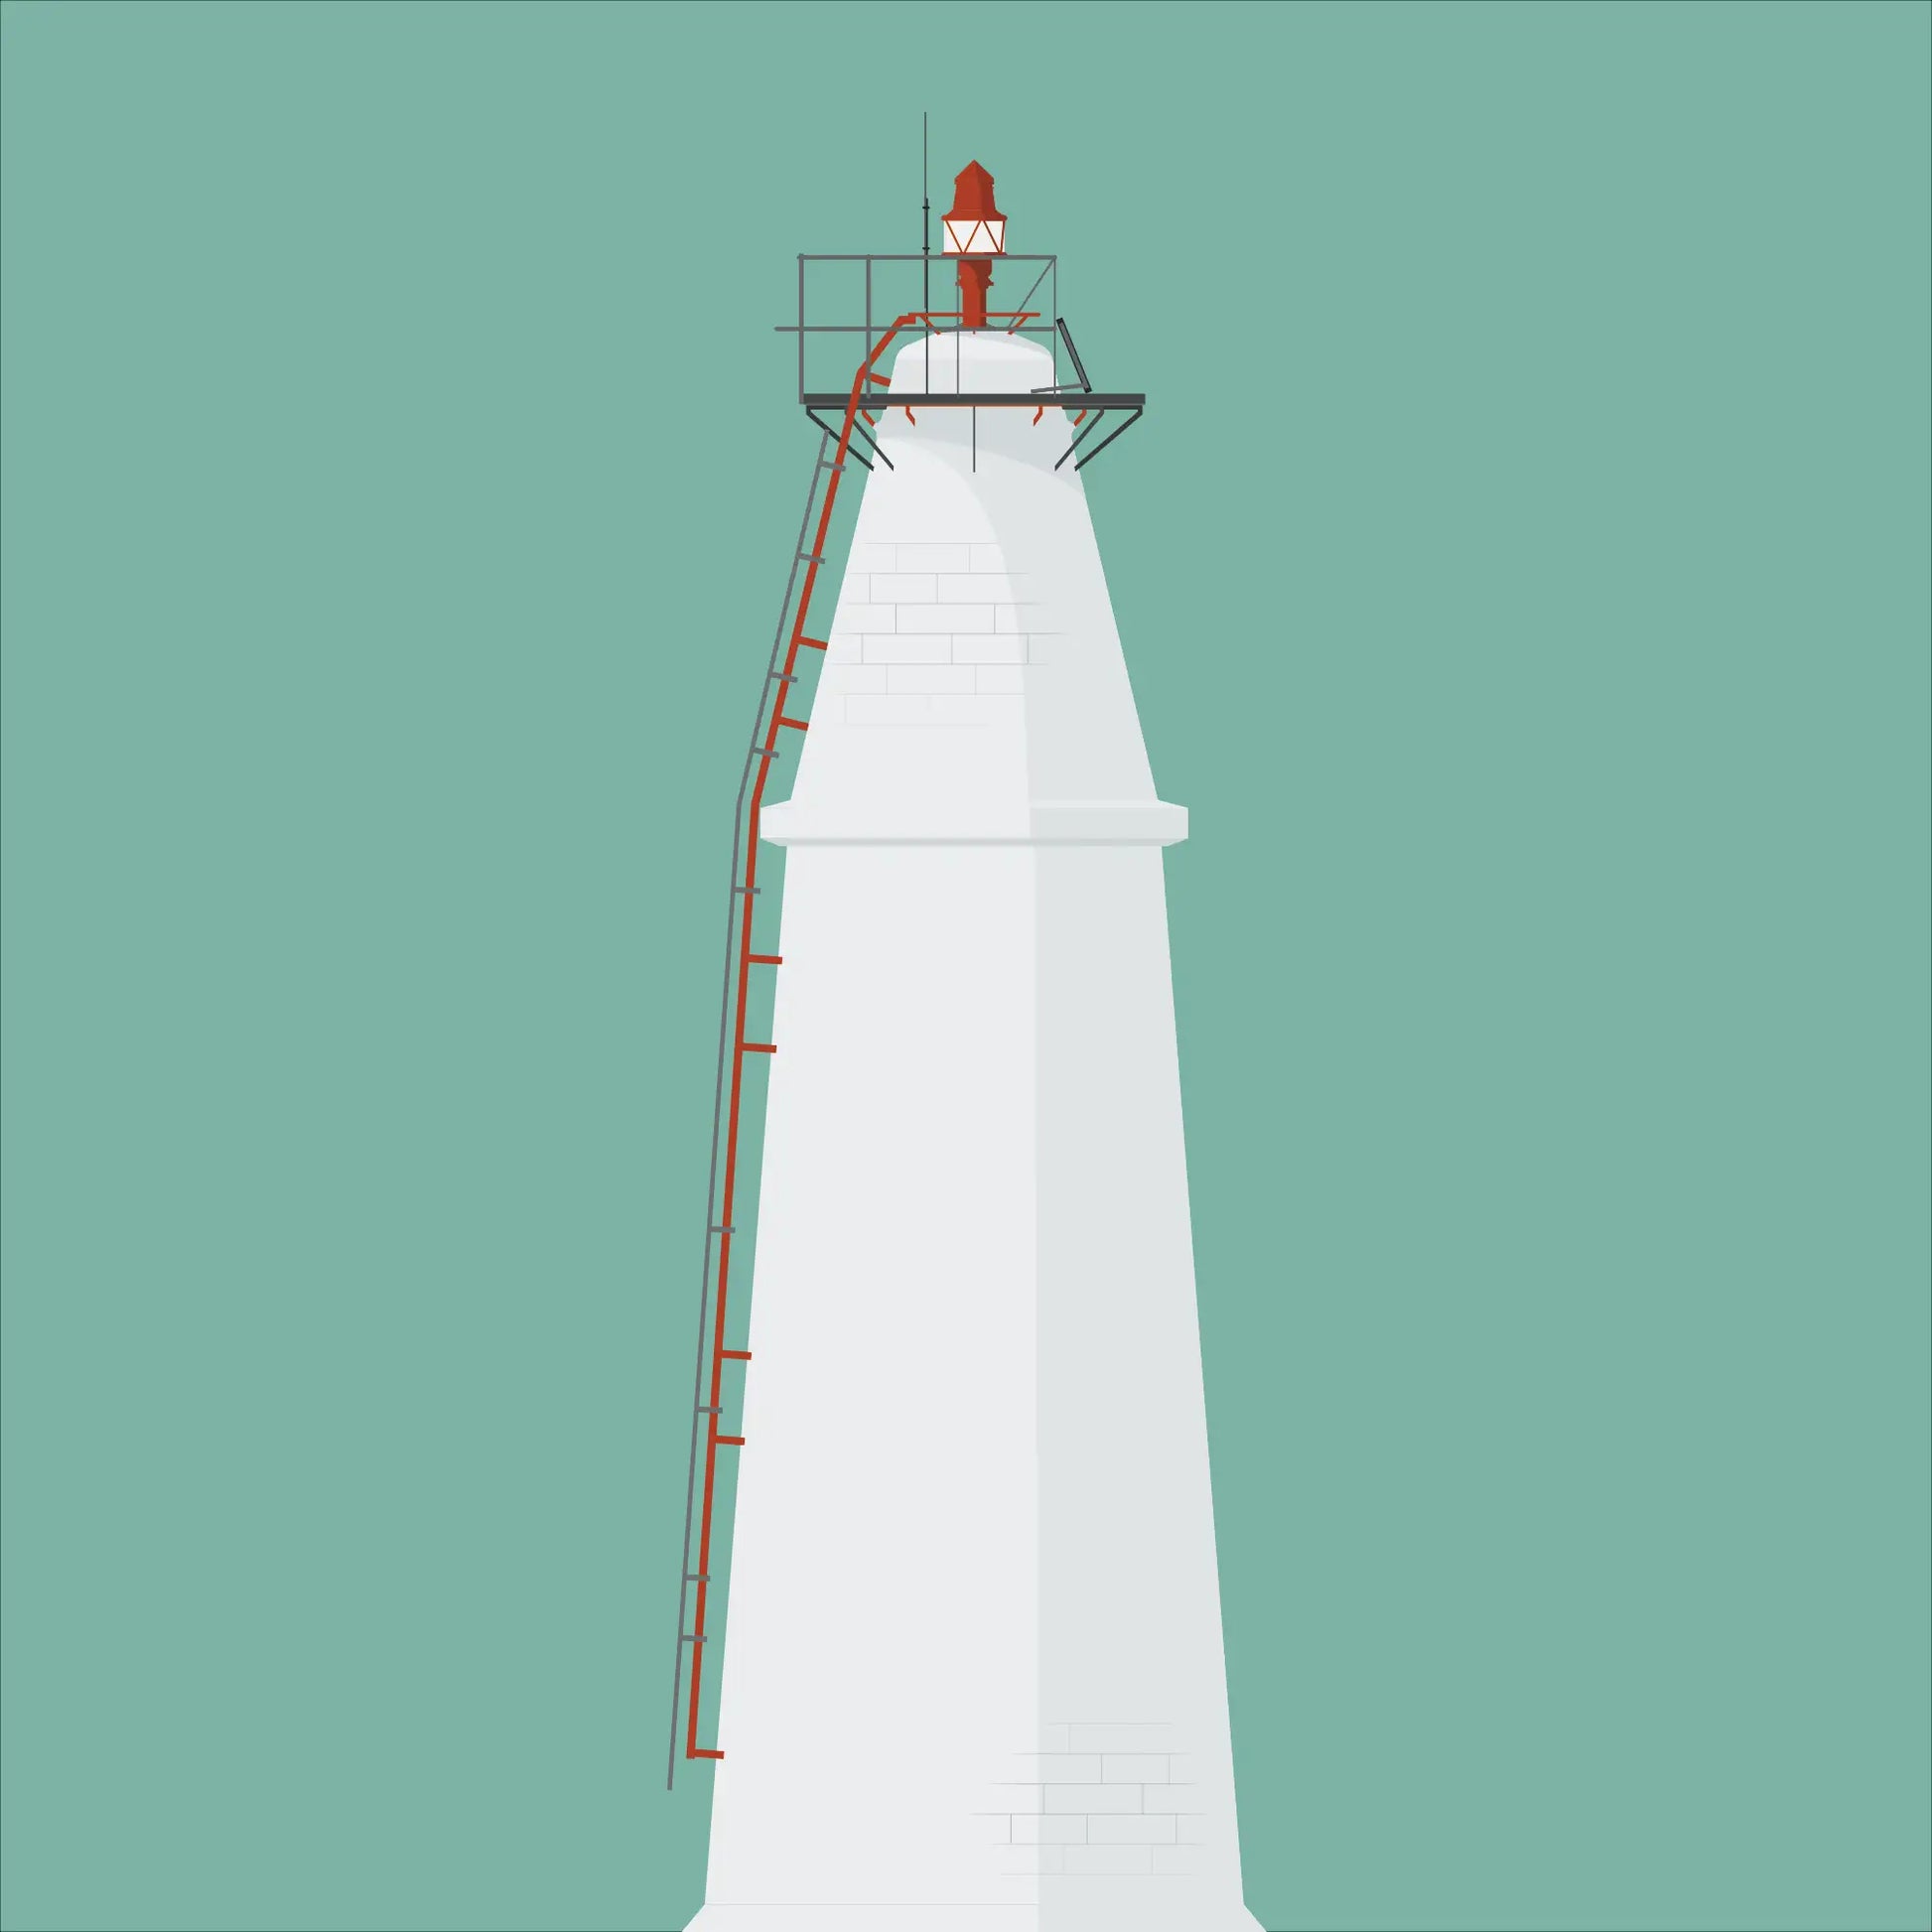 Contemporary graphic illustration of Copper Point lighthouse on a white background inside light blue square.